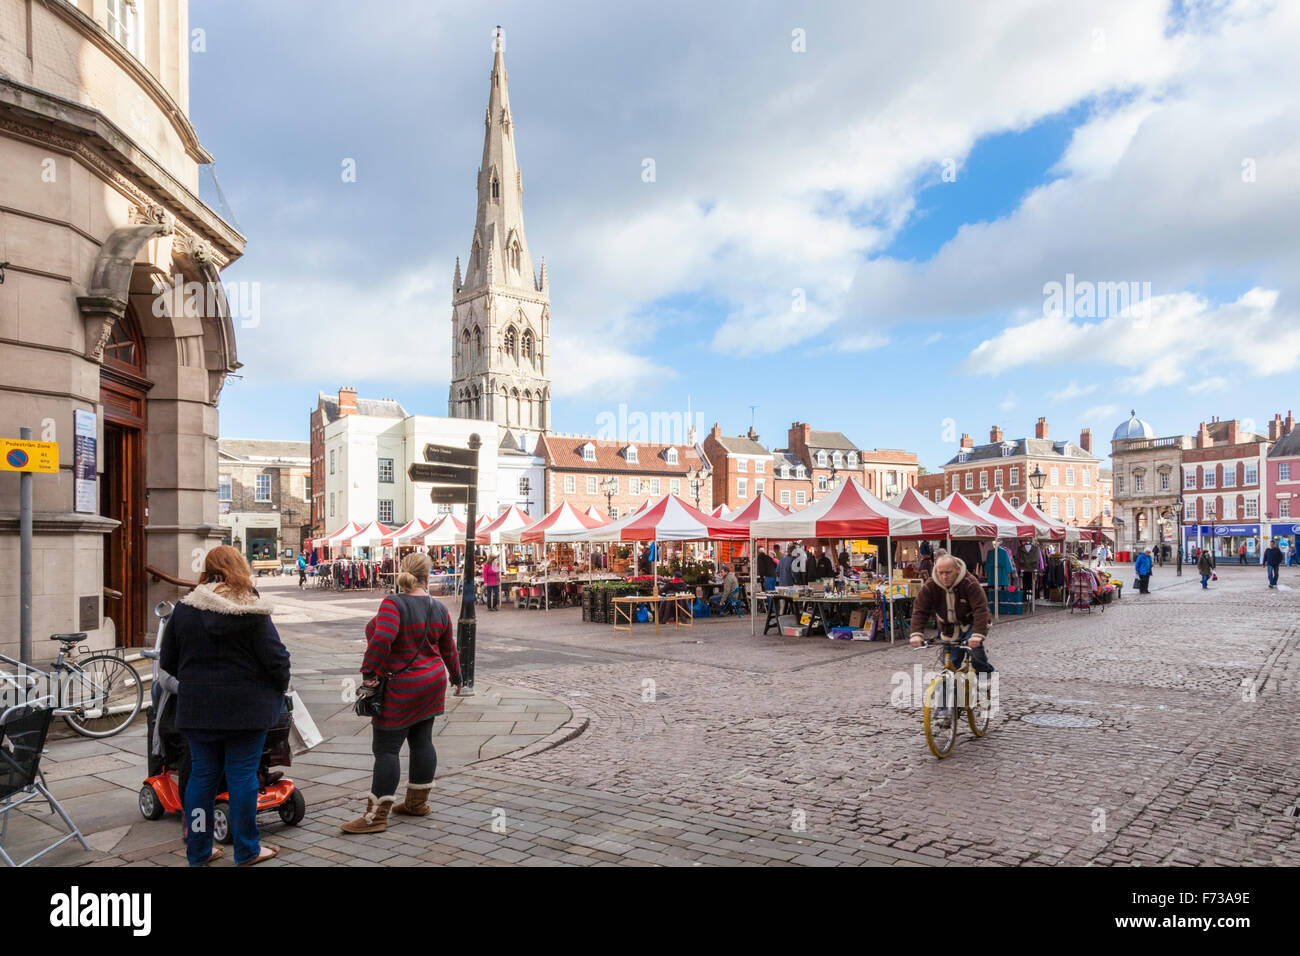 Market Place, in the market town of Newark on Trent, Nottinghamshire, England, UK with St Mary Magdalene Church in the background. Stock Photo